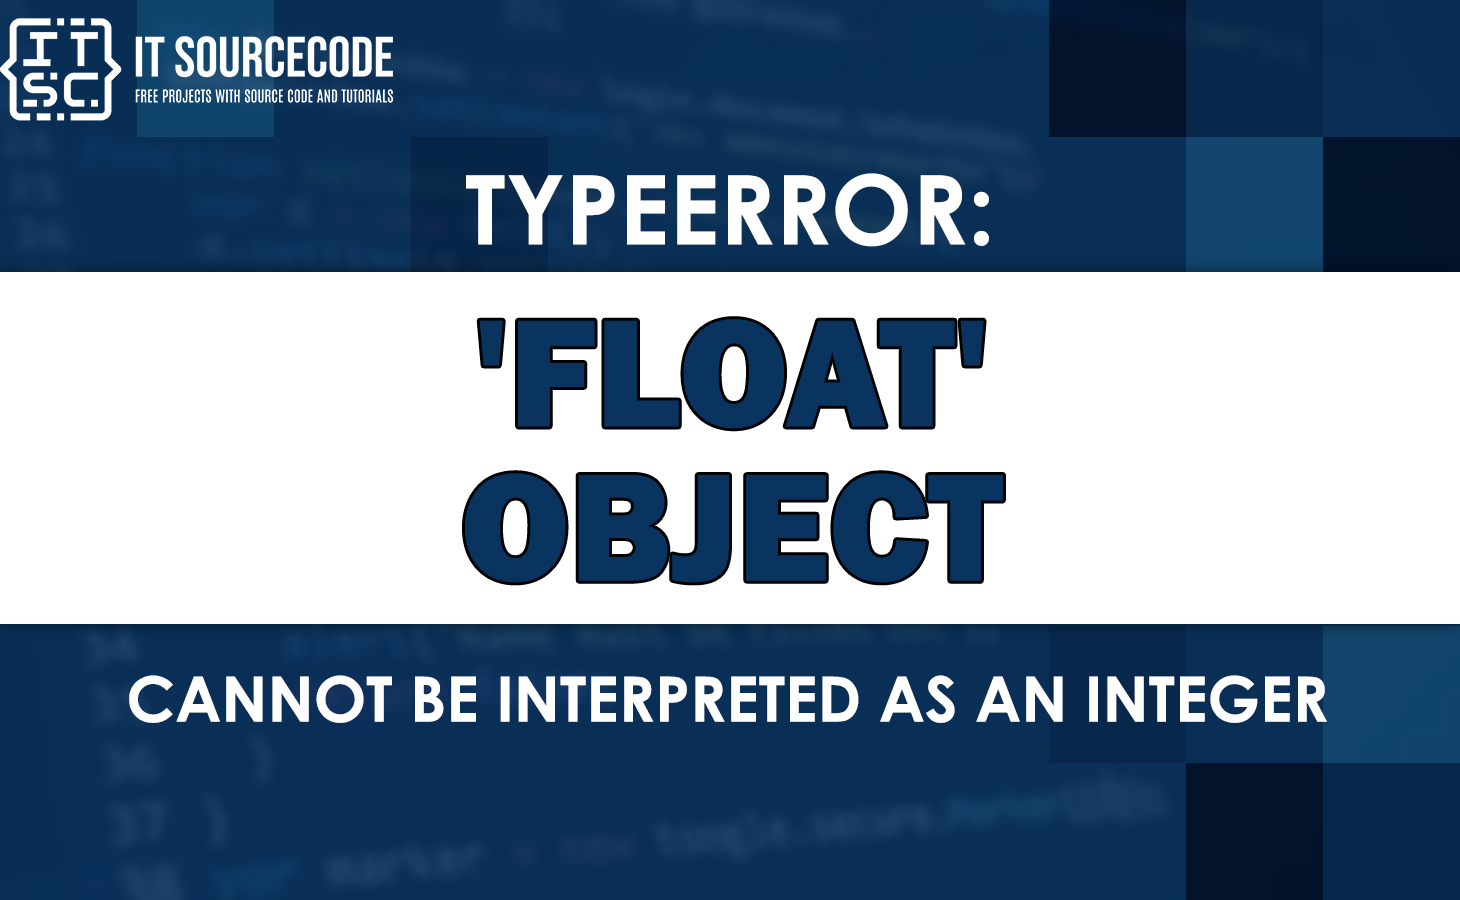 Typeerror: float object cannot be interpreted as an integer